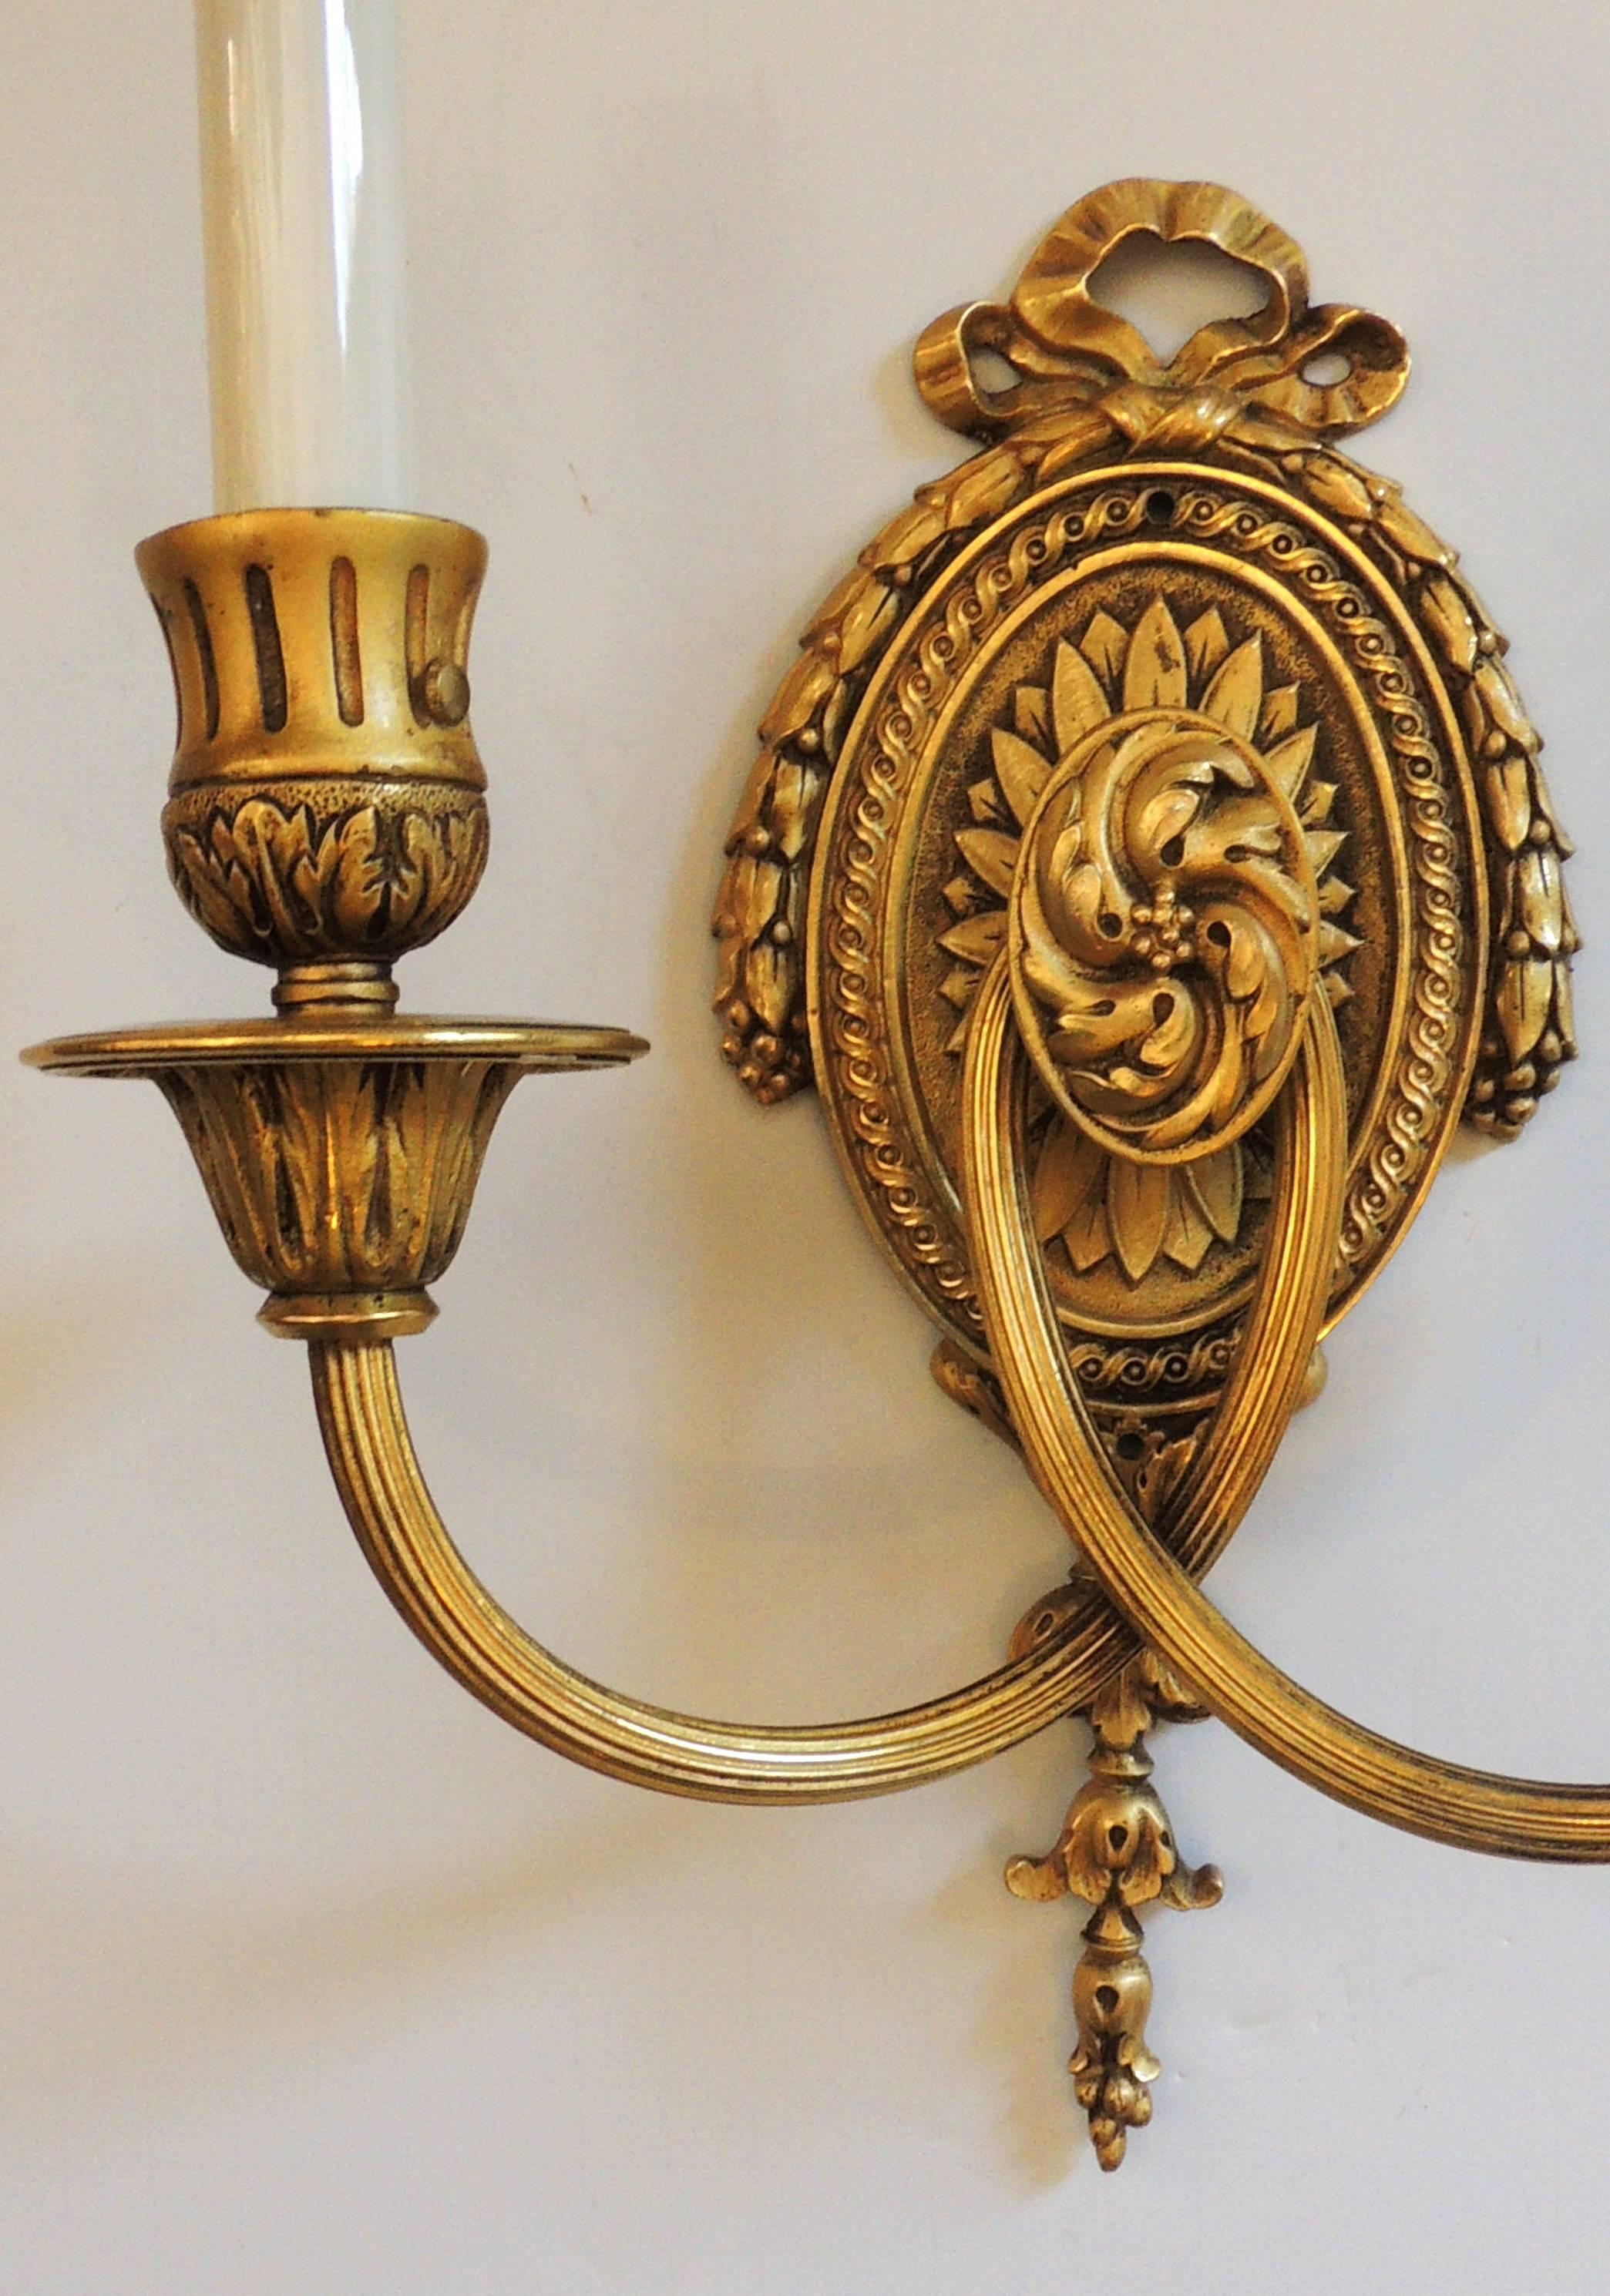 A wonderful set of four French bronze sconces in the manner of E.F. Caldwell in the neoclassical / Regency style with two-arm per socket each accepting 60 watts per socket
Completely rewired and ready to install

Sold per pair $1,850.